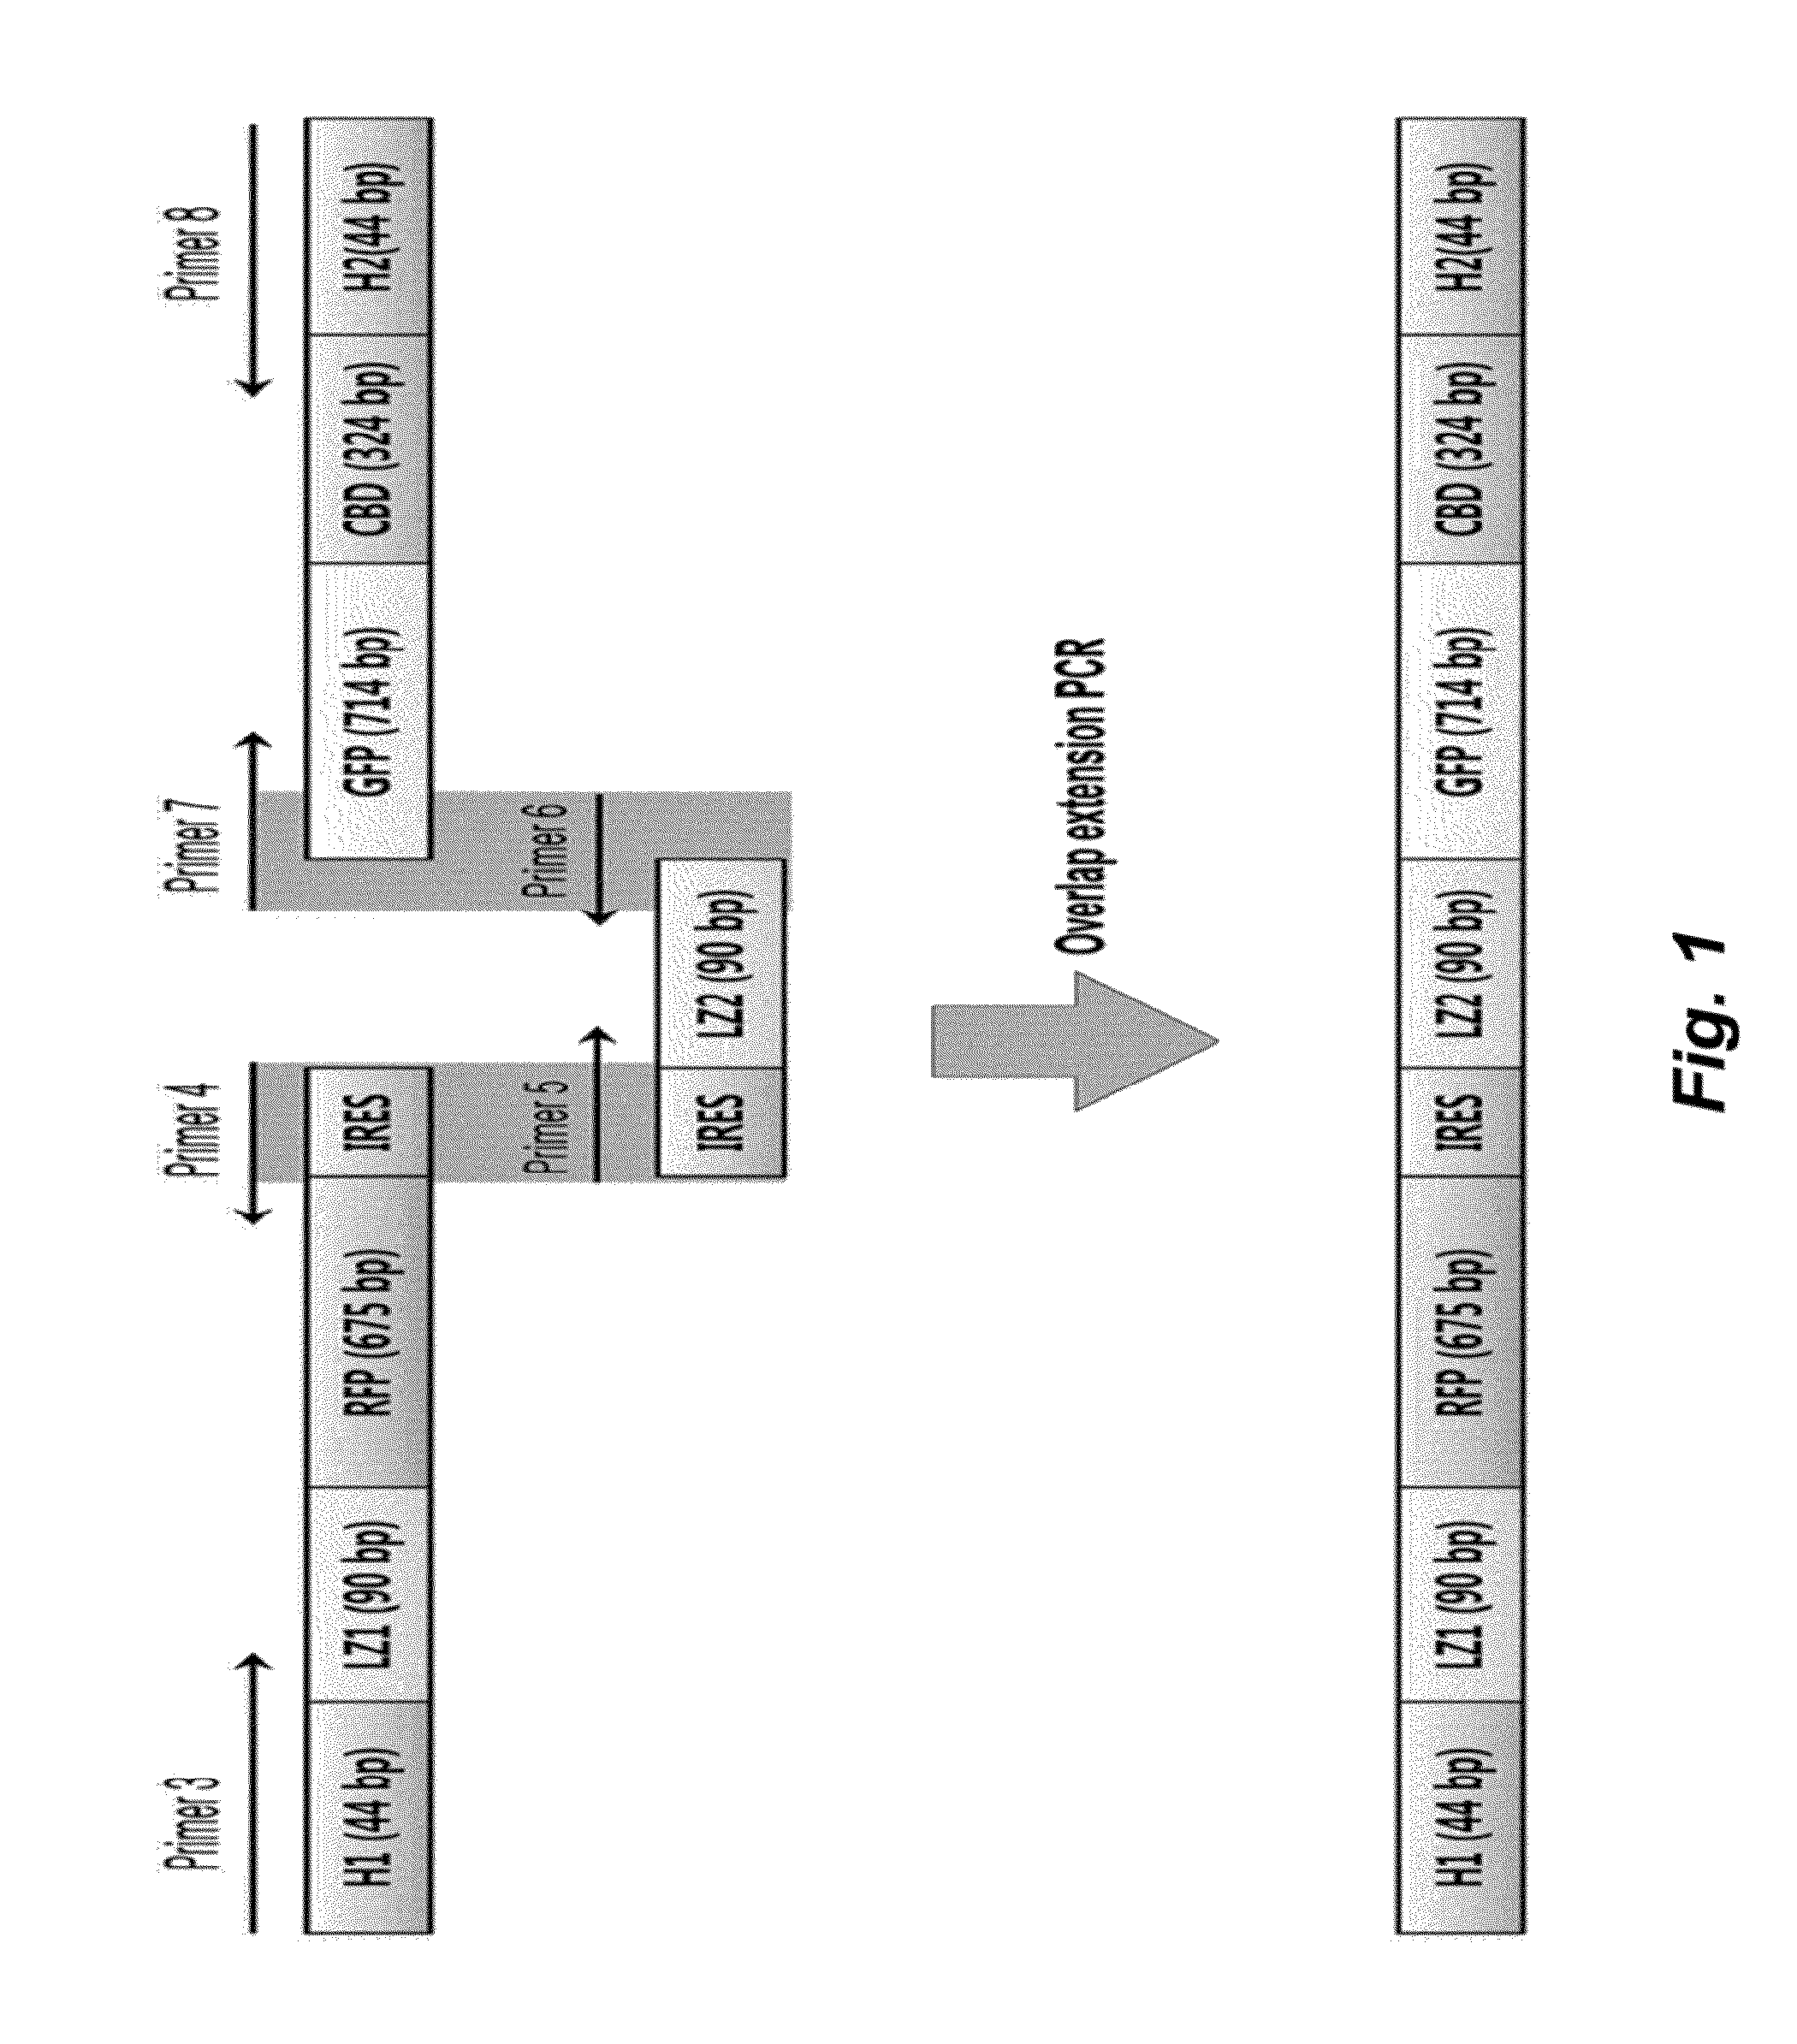 Method for detecting protein-protein interactions in cells